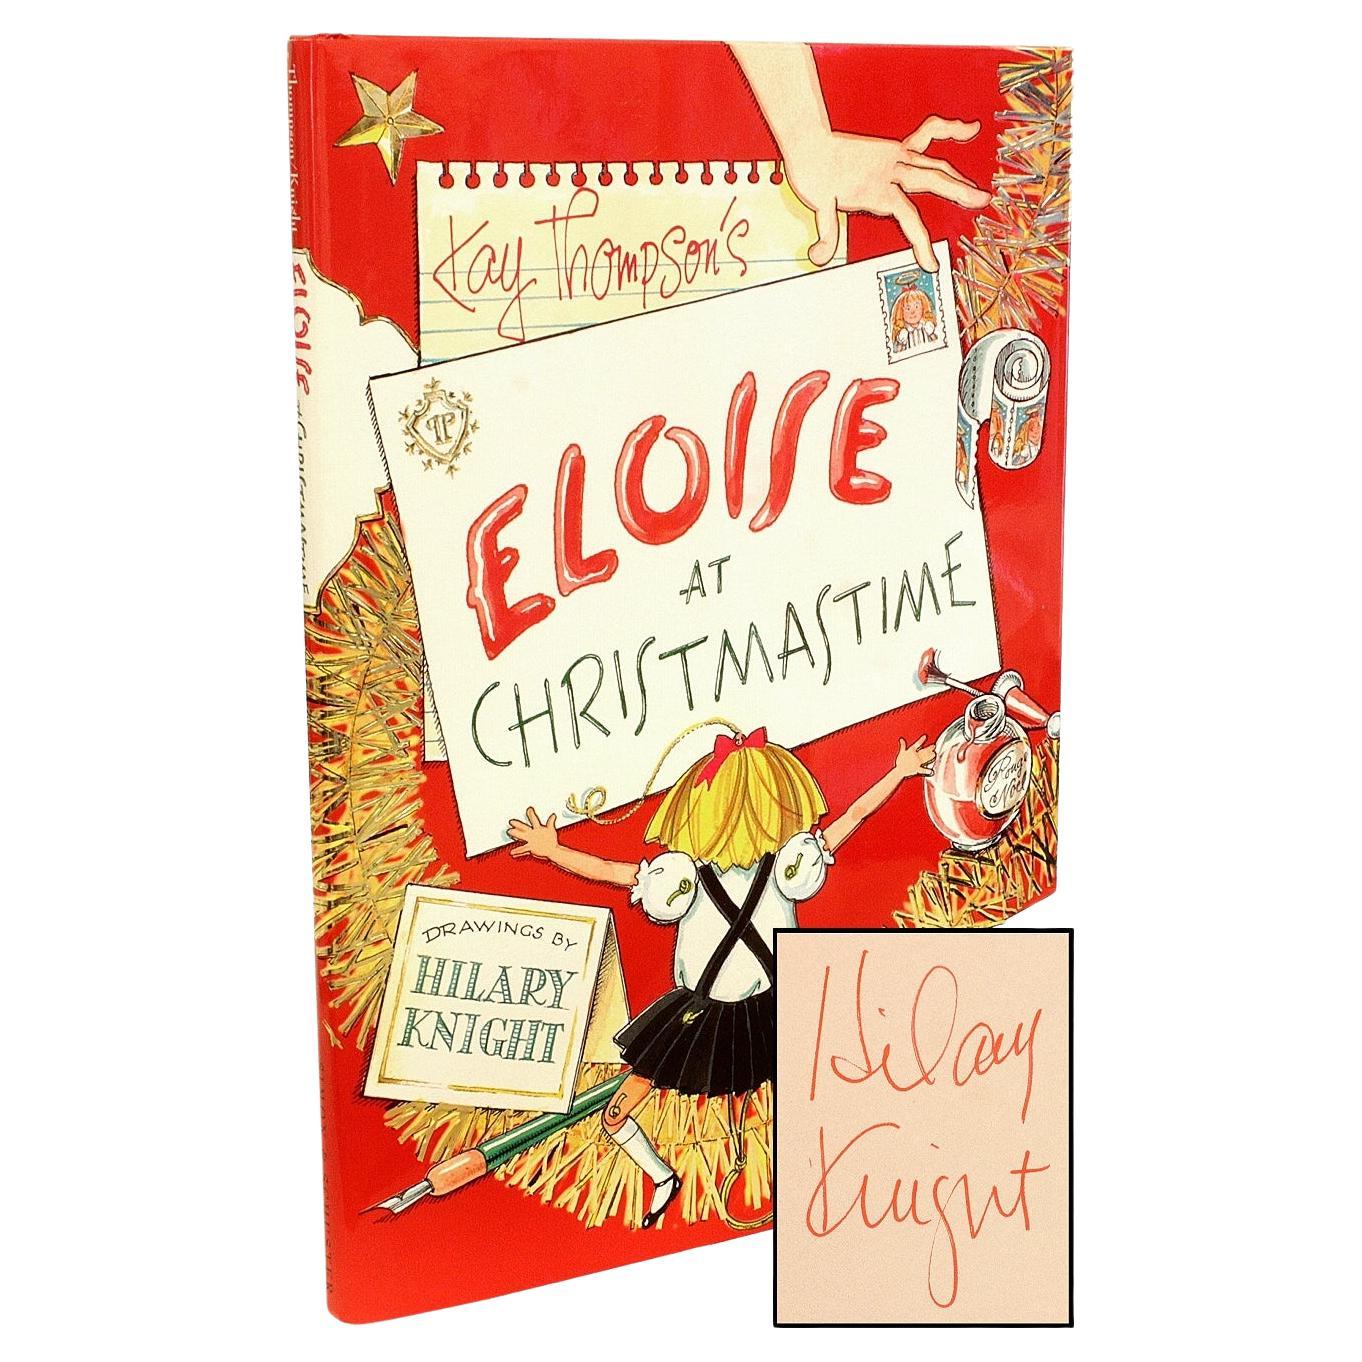 Eloise At Christmastime, Kay Thompson, 1999, Signed by Hilary Knight ! For Sale